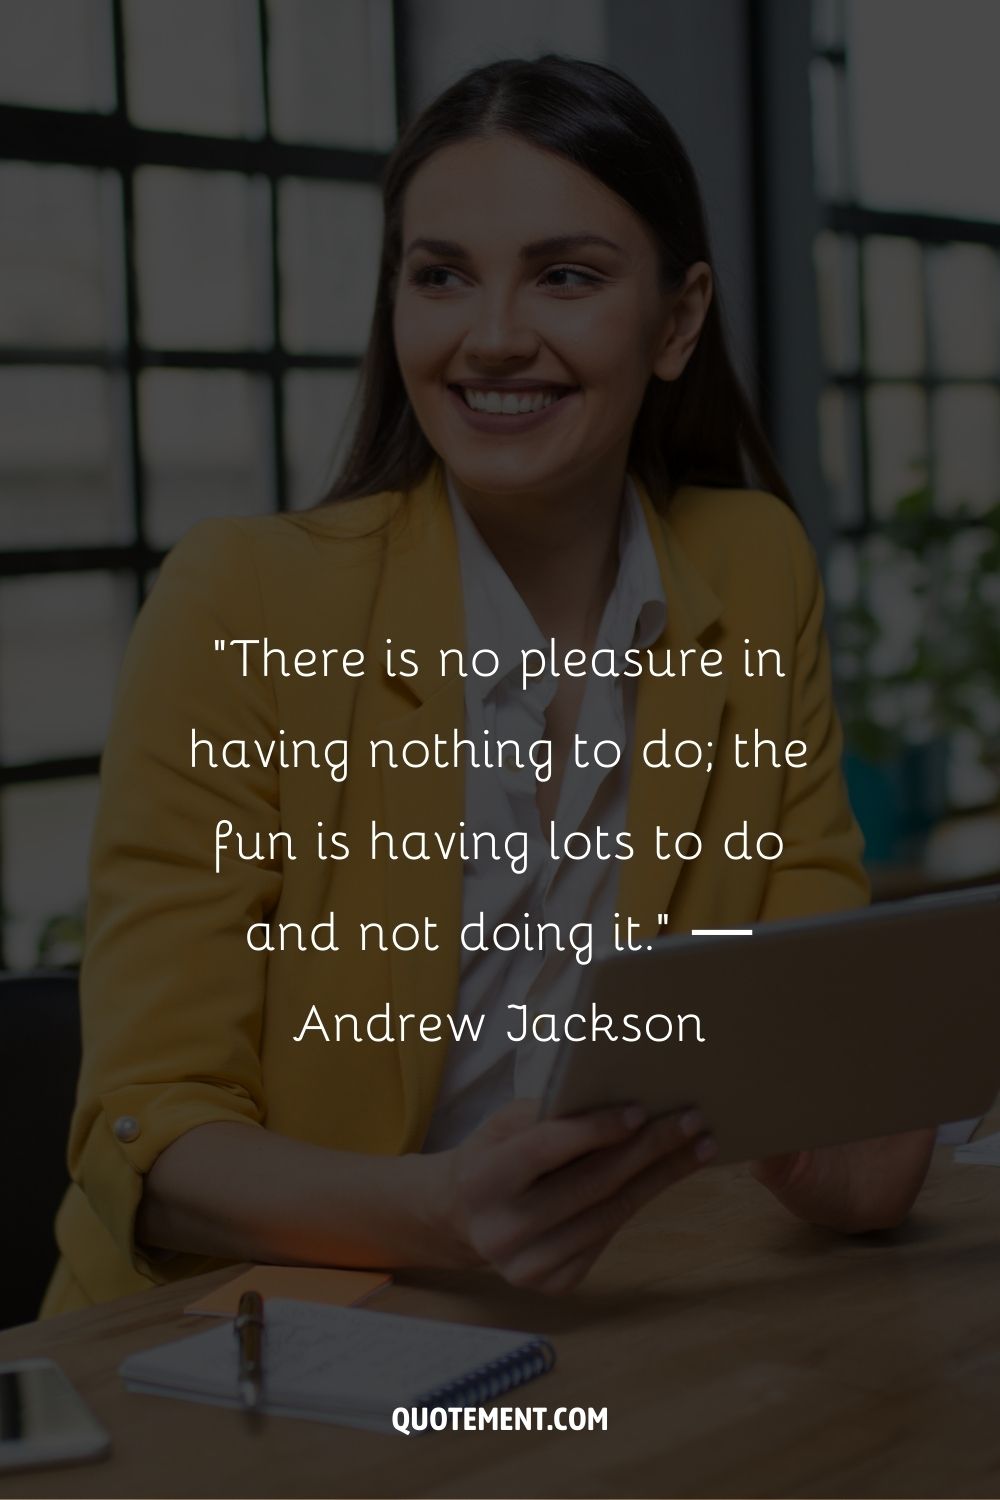 “There is no pleasure in having nothing to do; the fun is having lots to do and not doing it.” ― Andrew Jackson